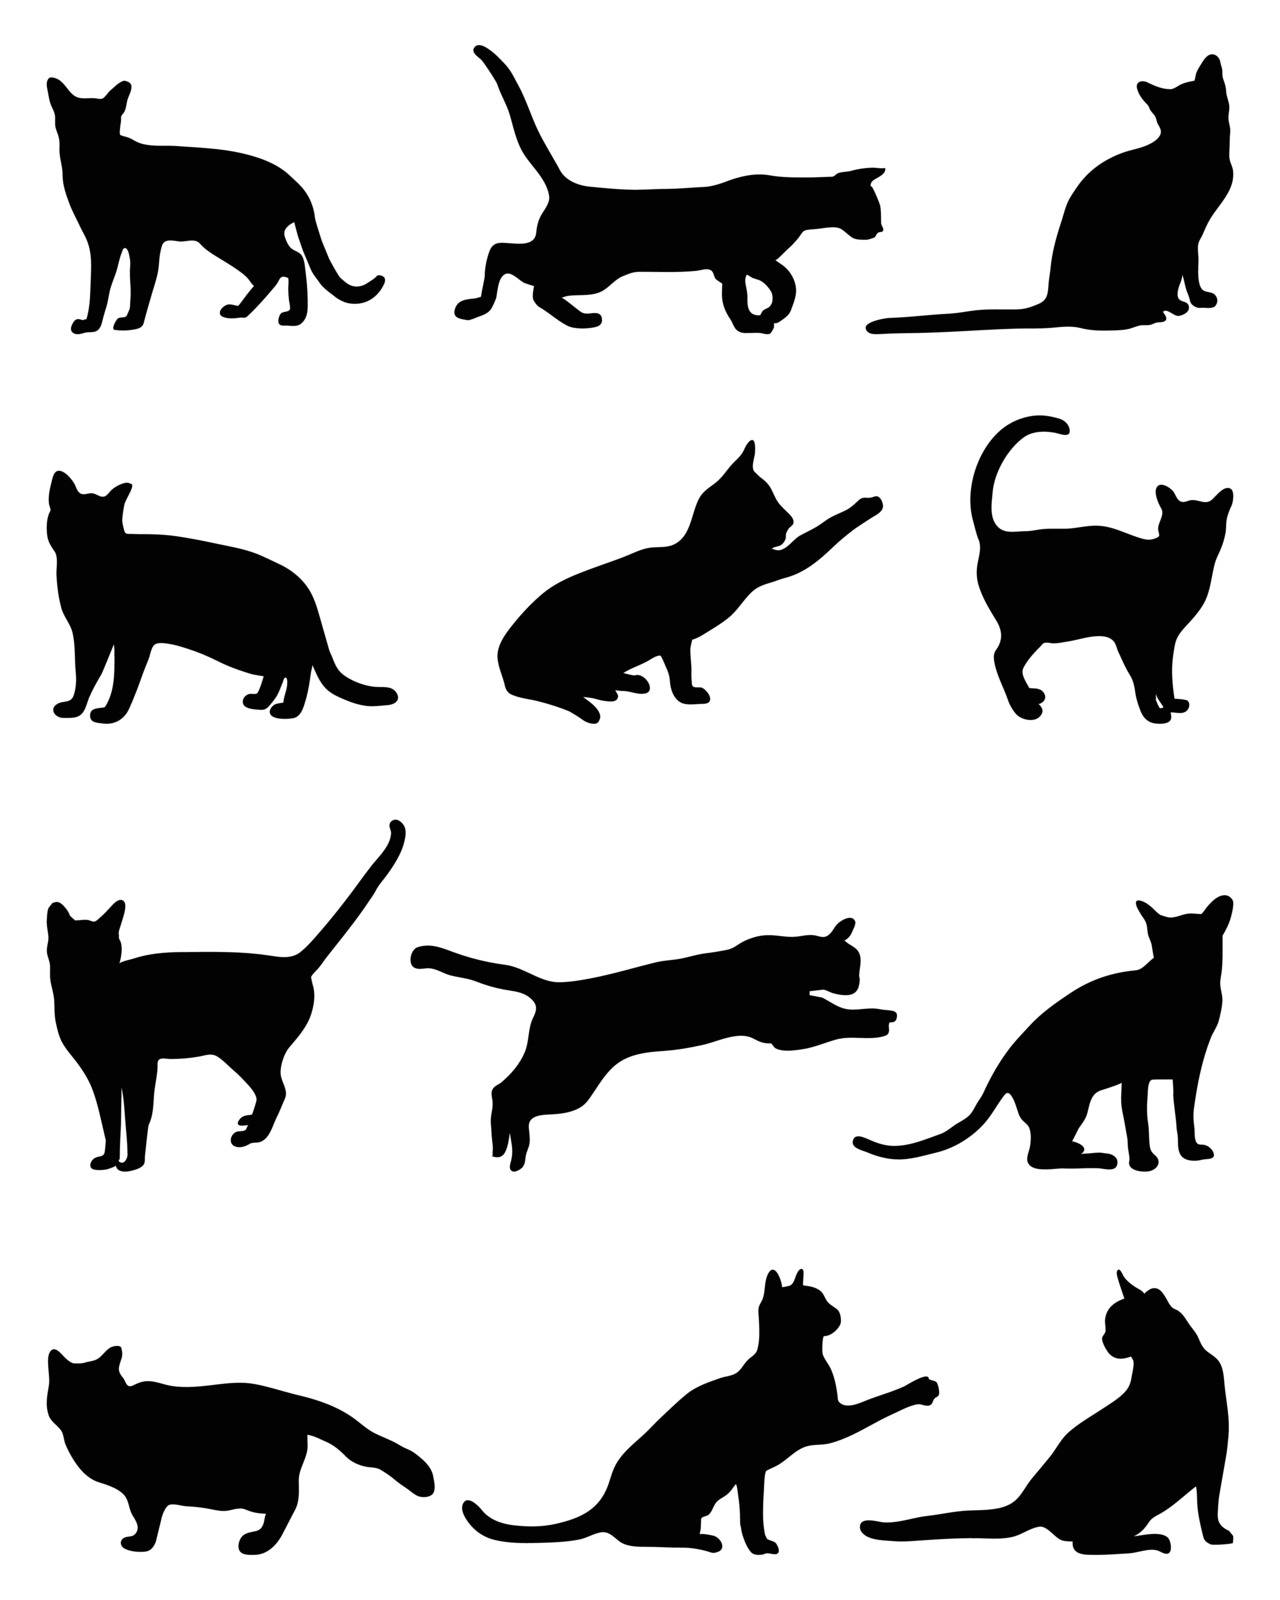 silhouettes of cats by ratkomat